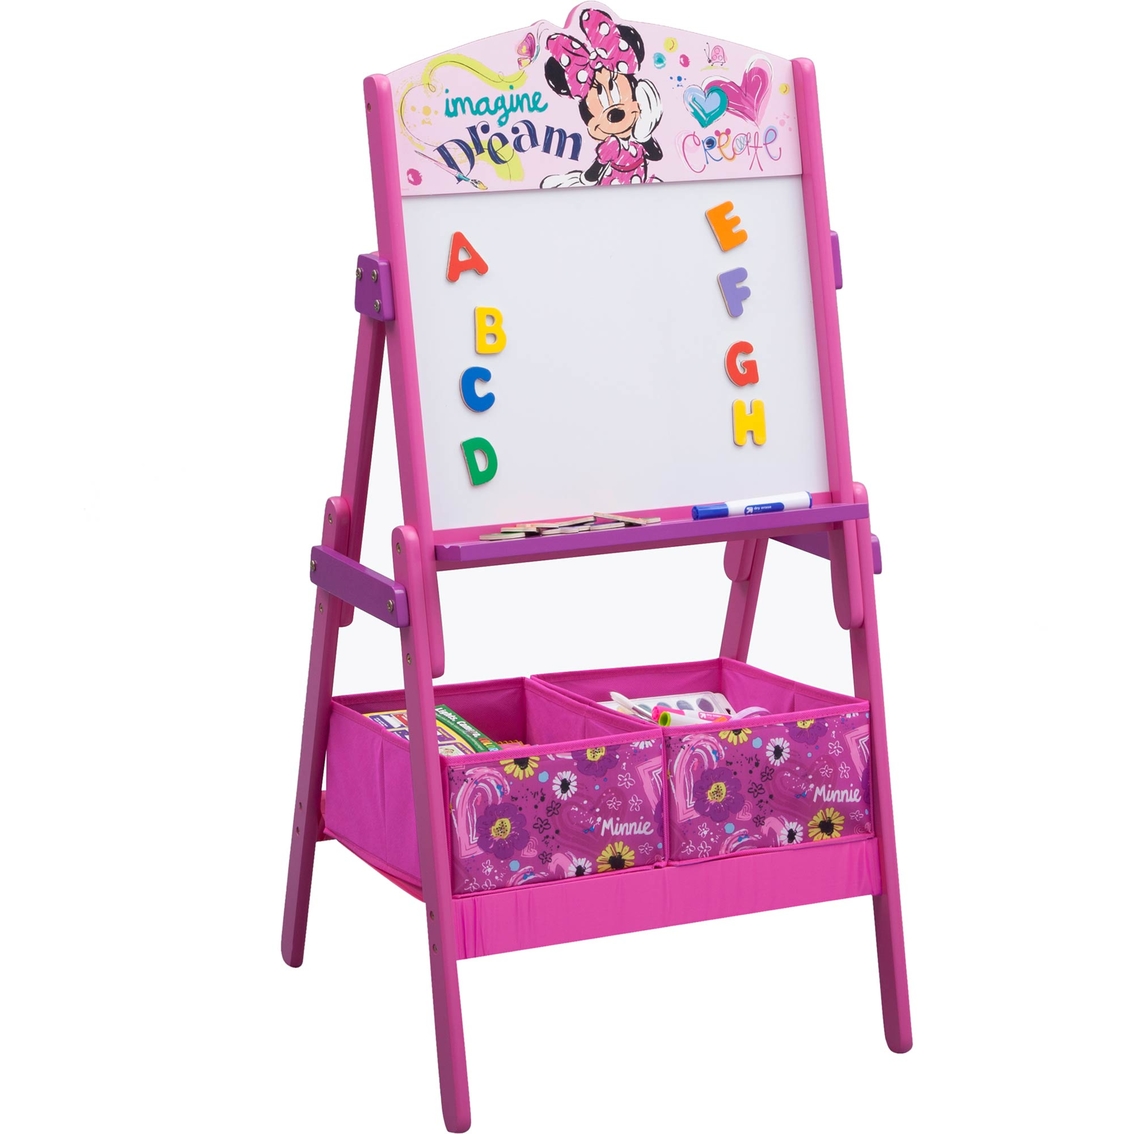 Disney Minnie Mouse Wooden Activity Whiteboard Easel with Storage - Image 2 of 4